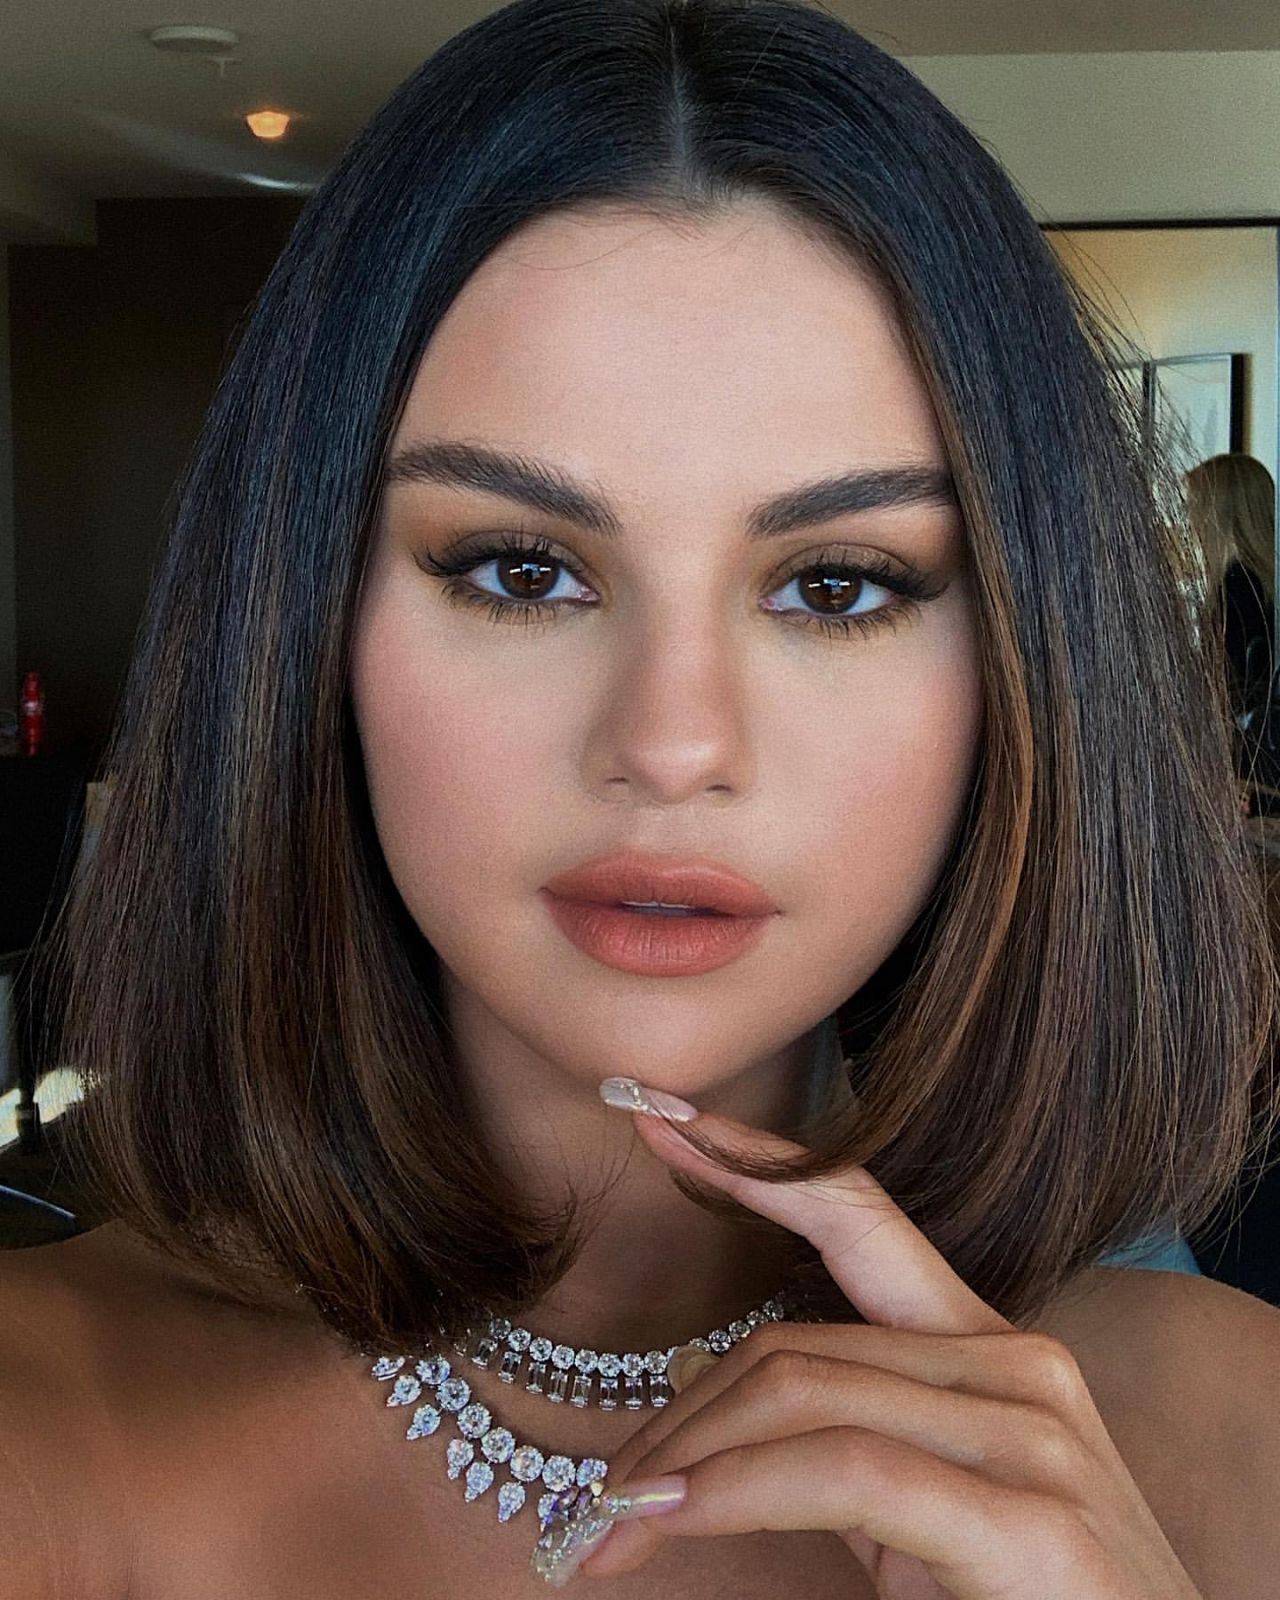 Selena Gomez tons of sexy BTS selfies from the AMAs